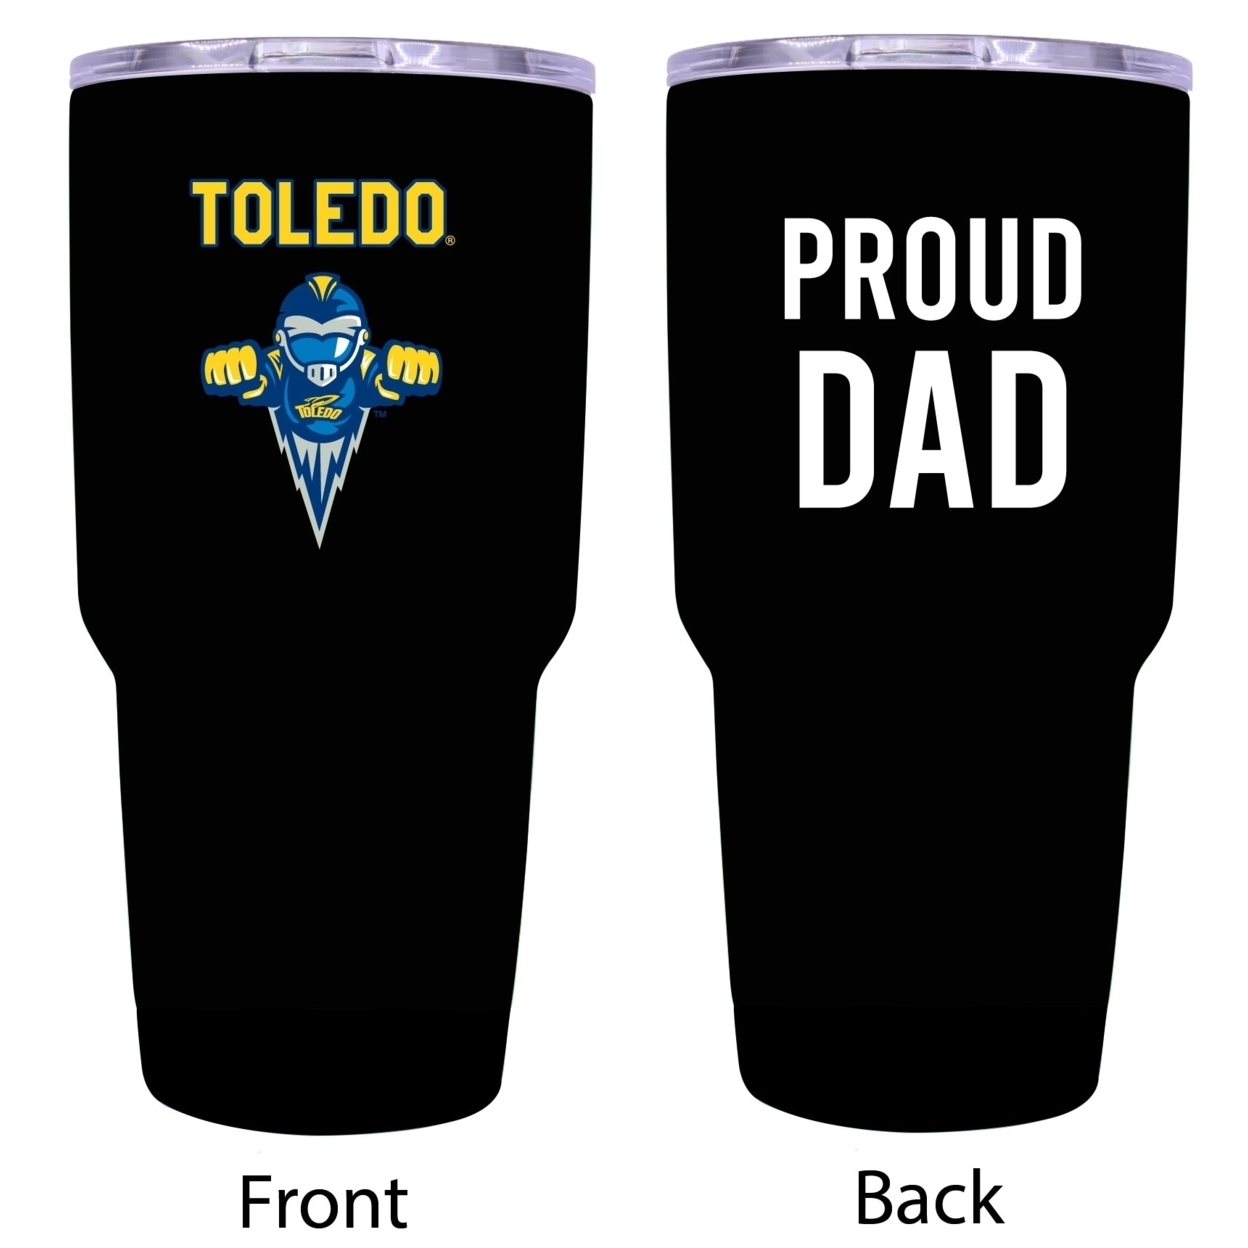 Toledo Rockets Proud Dad 24 Oz Insulated Stainless Steel Tumblers Choose Your Color. - Black